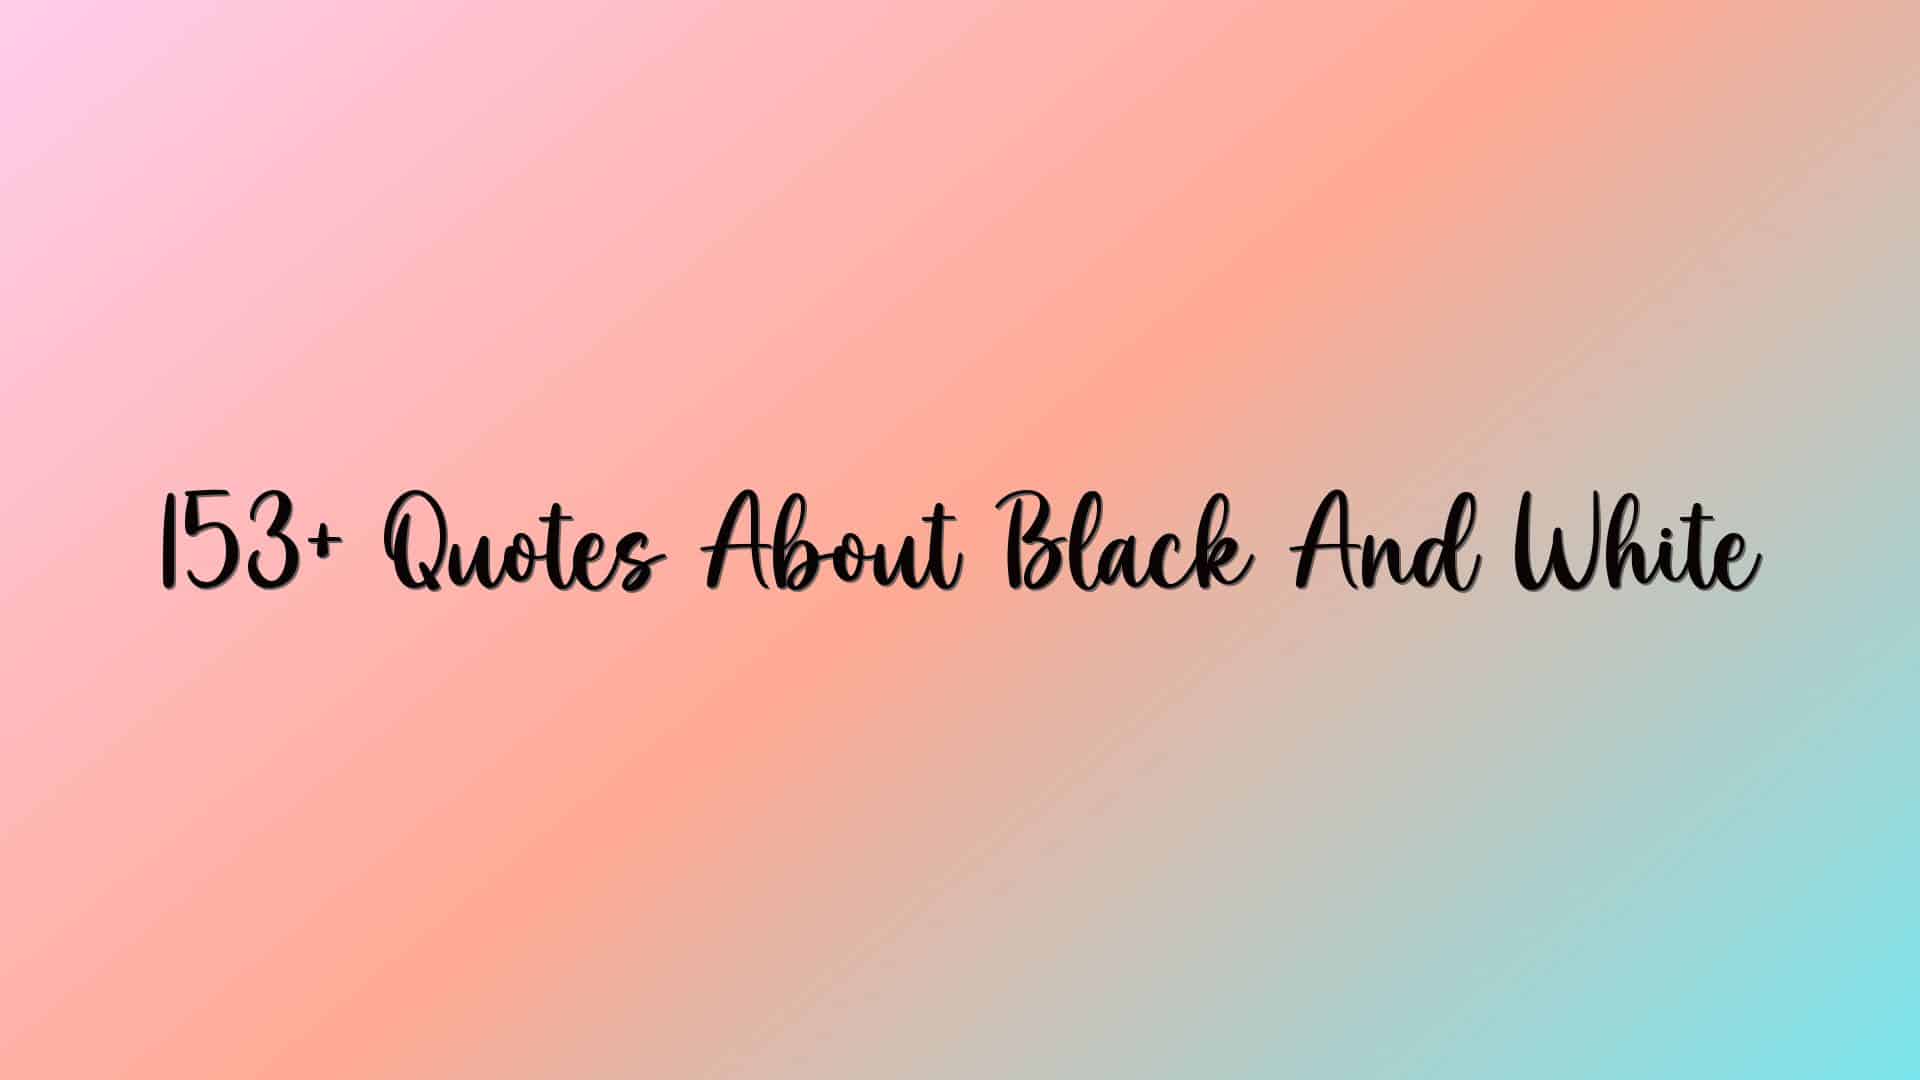 153+ Quotes About Black And White